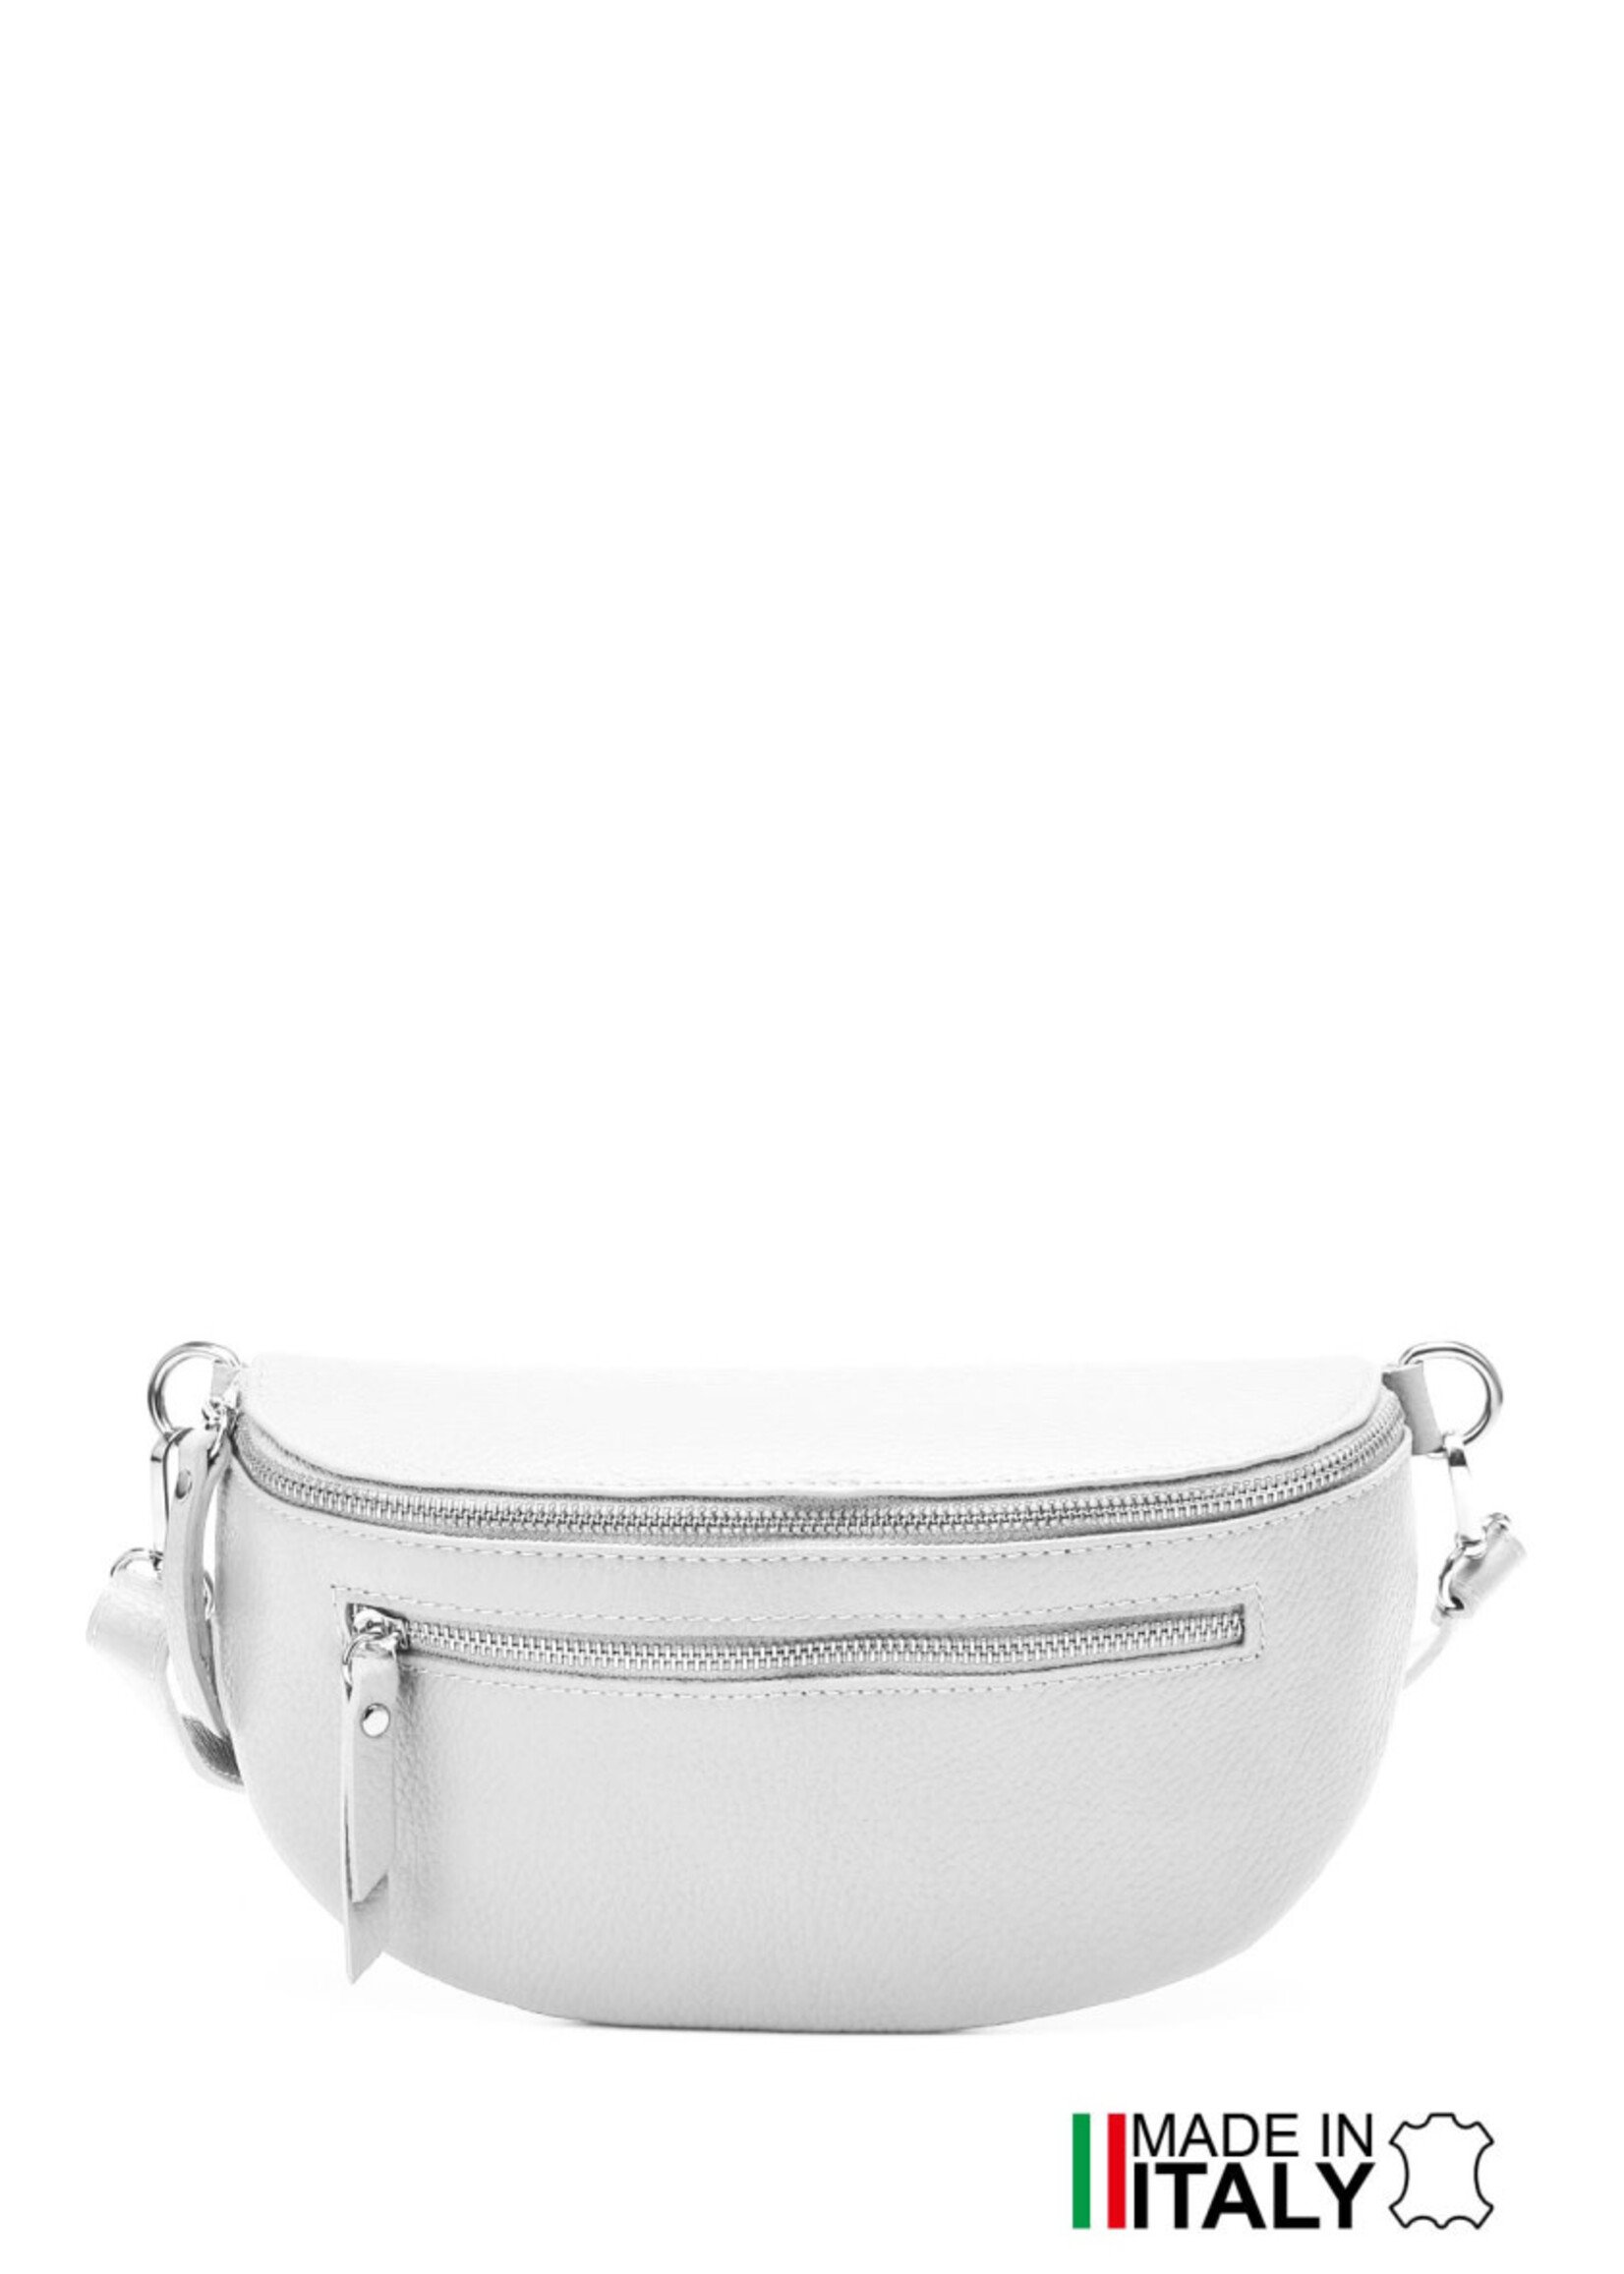 WHITE LEATHER BUMBAG WIT STRAP